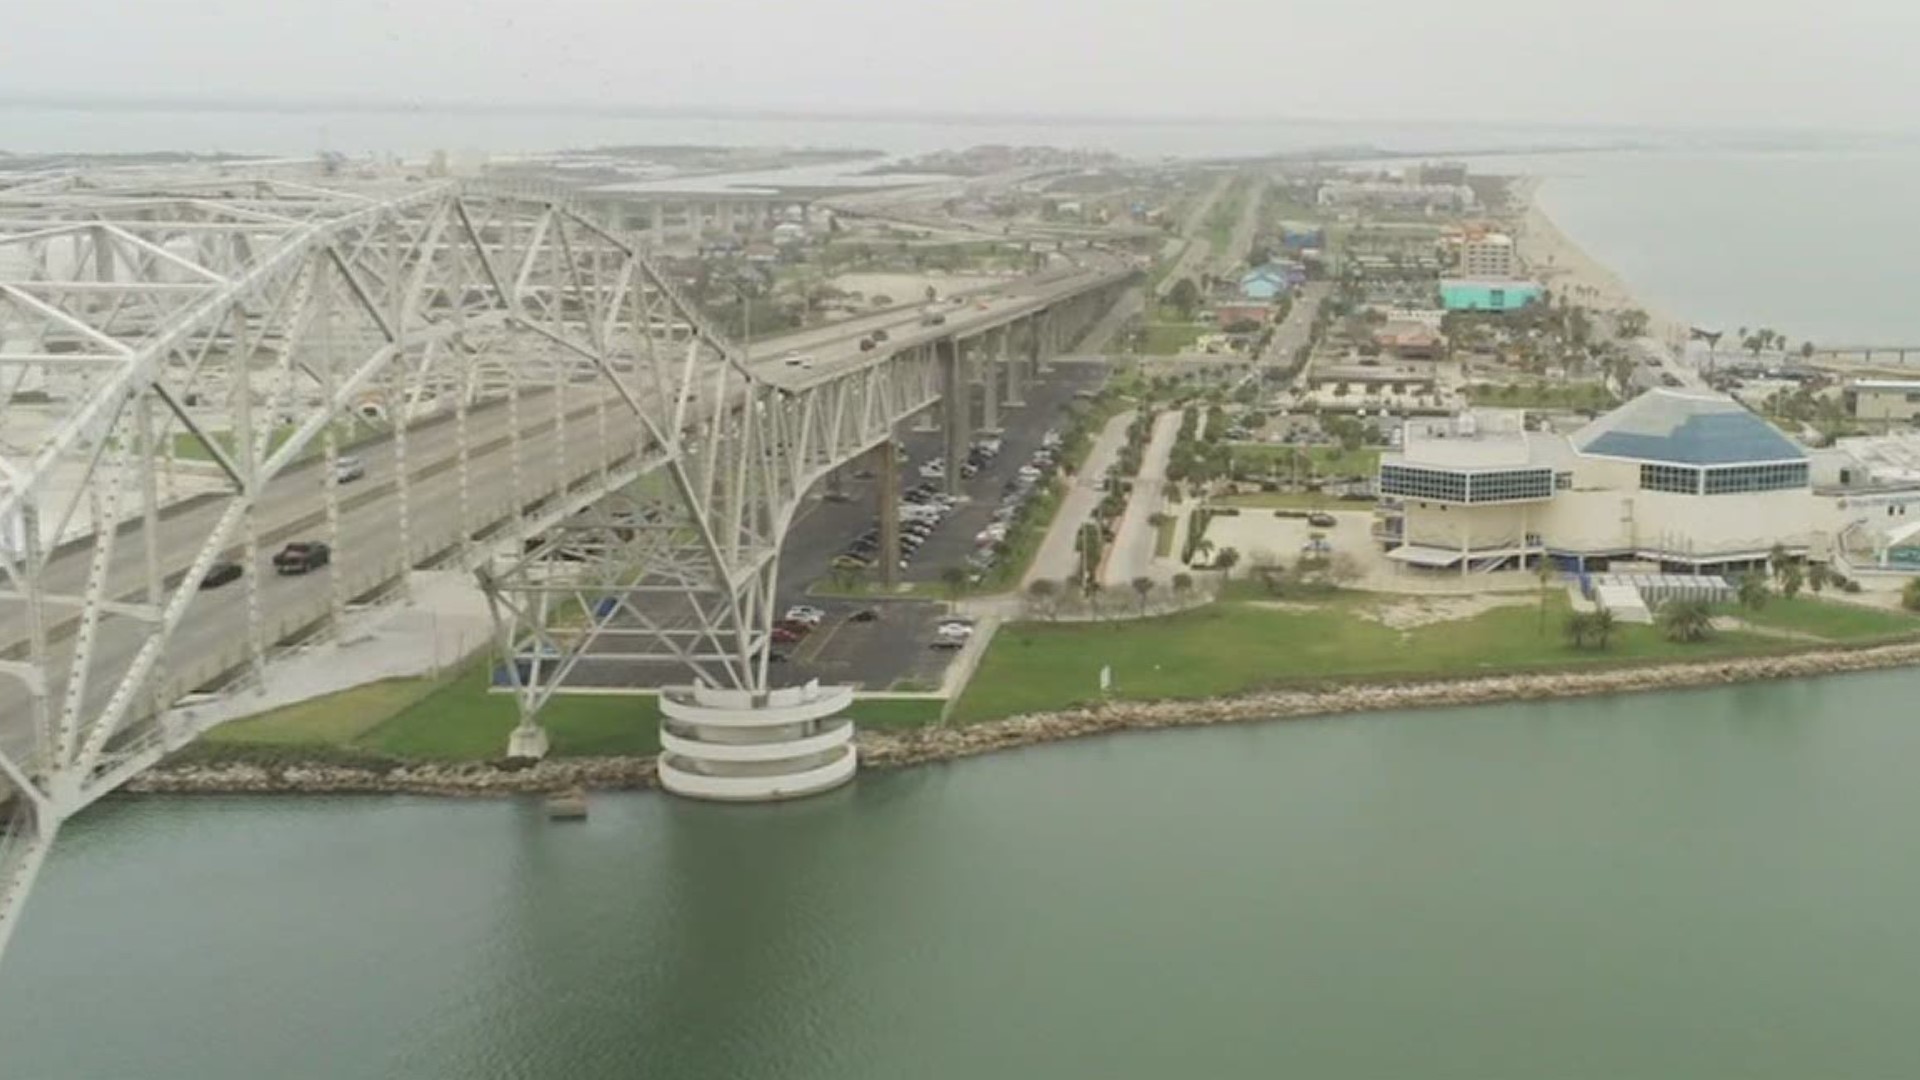 Our Port is the third largest in the country, and a major economic driver in our state.